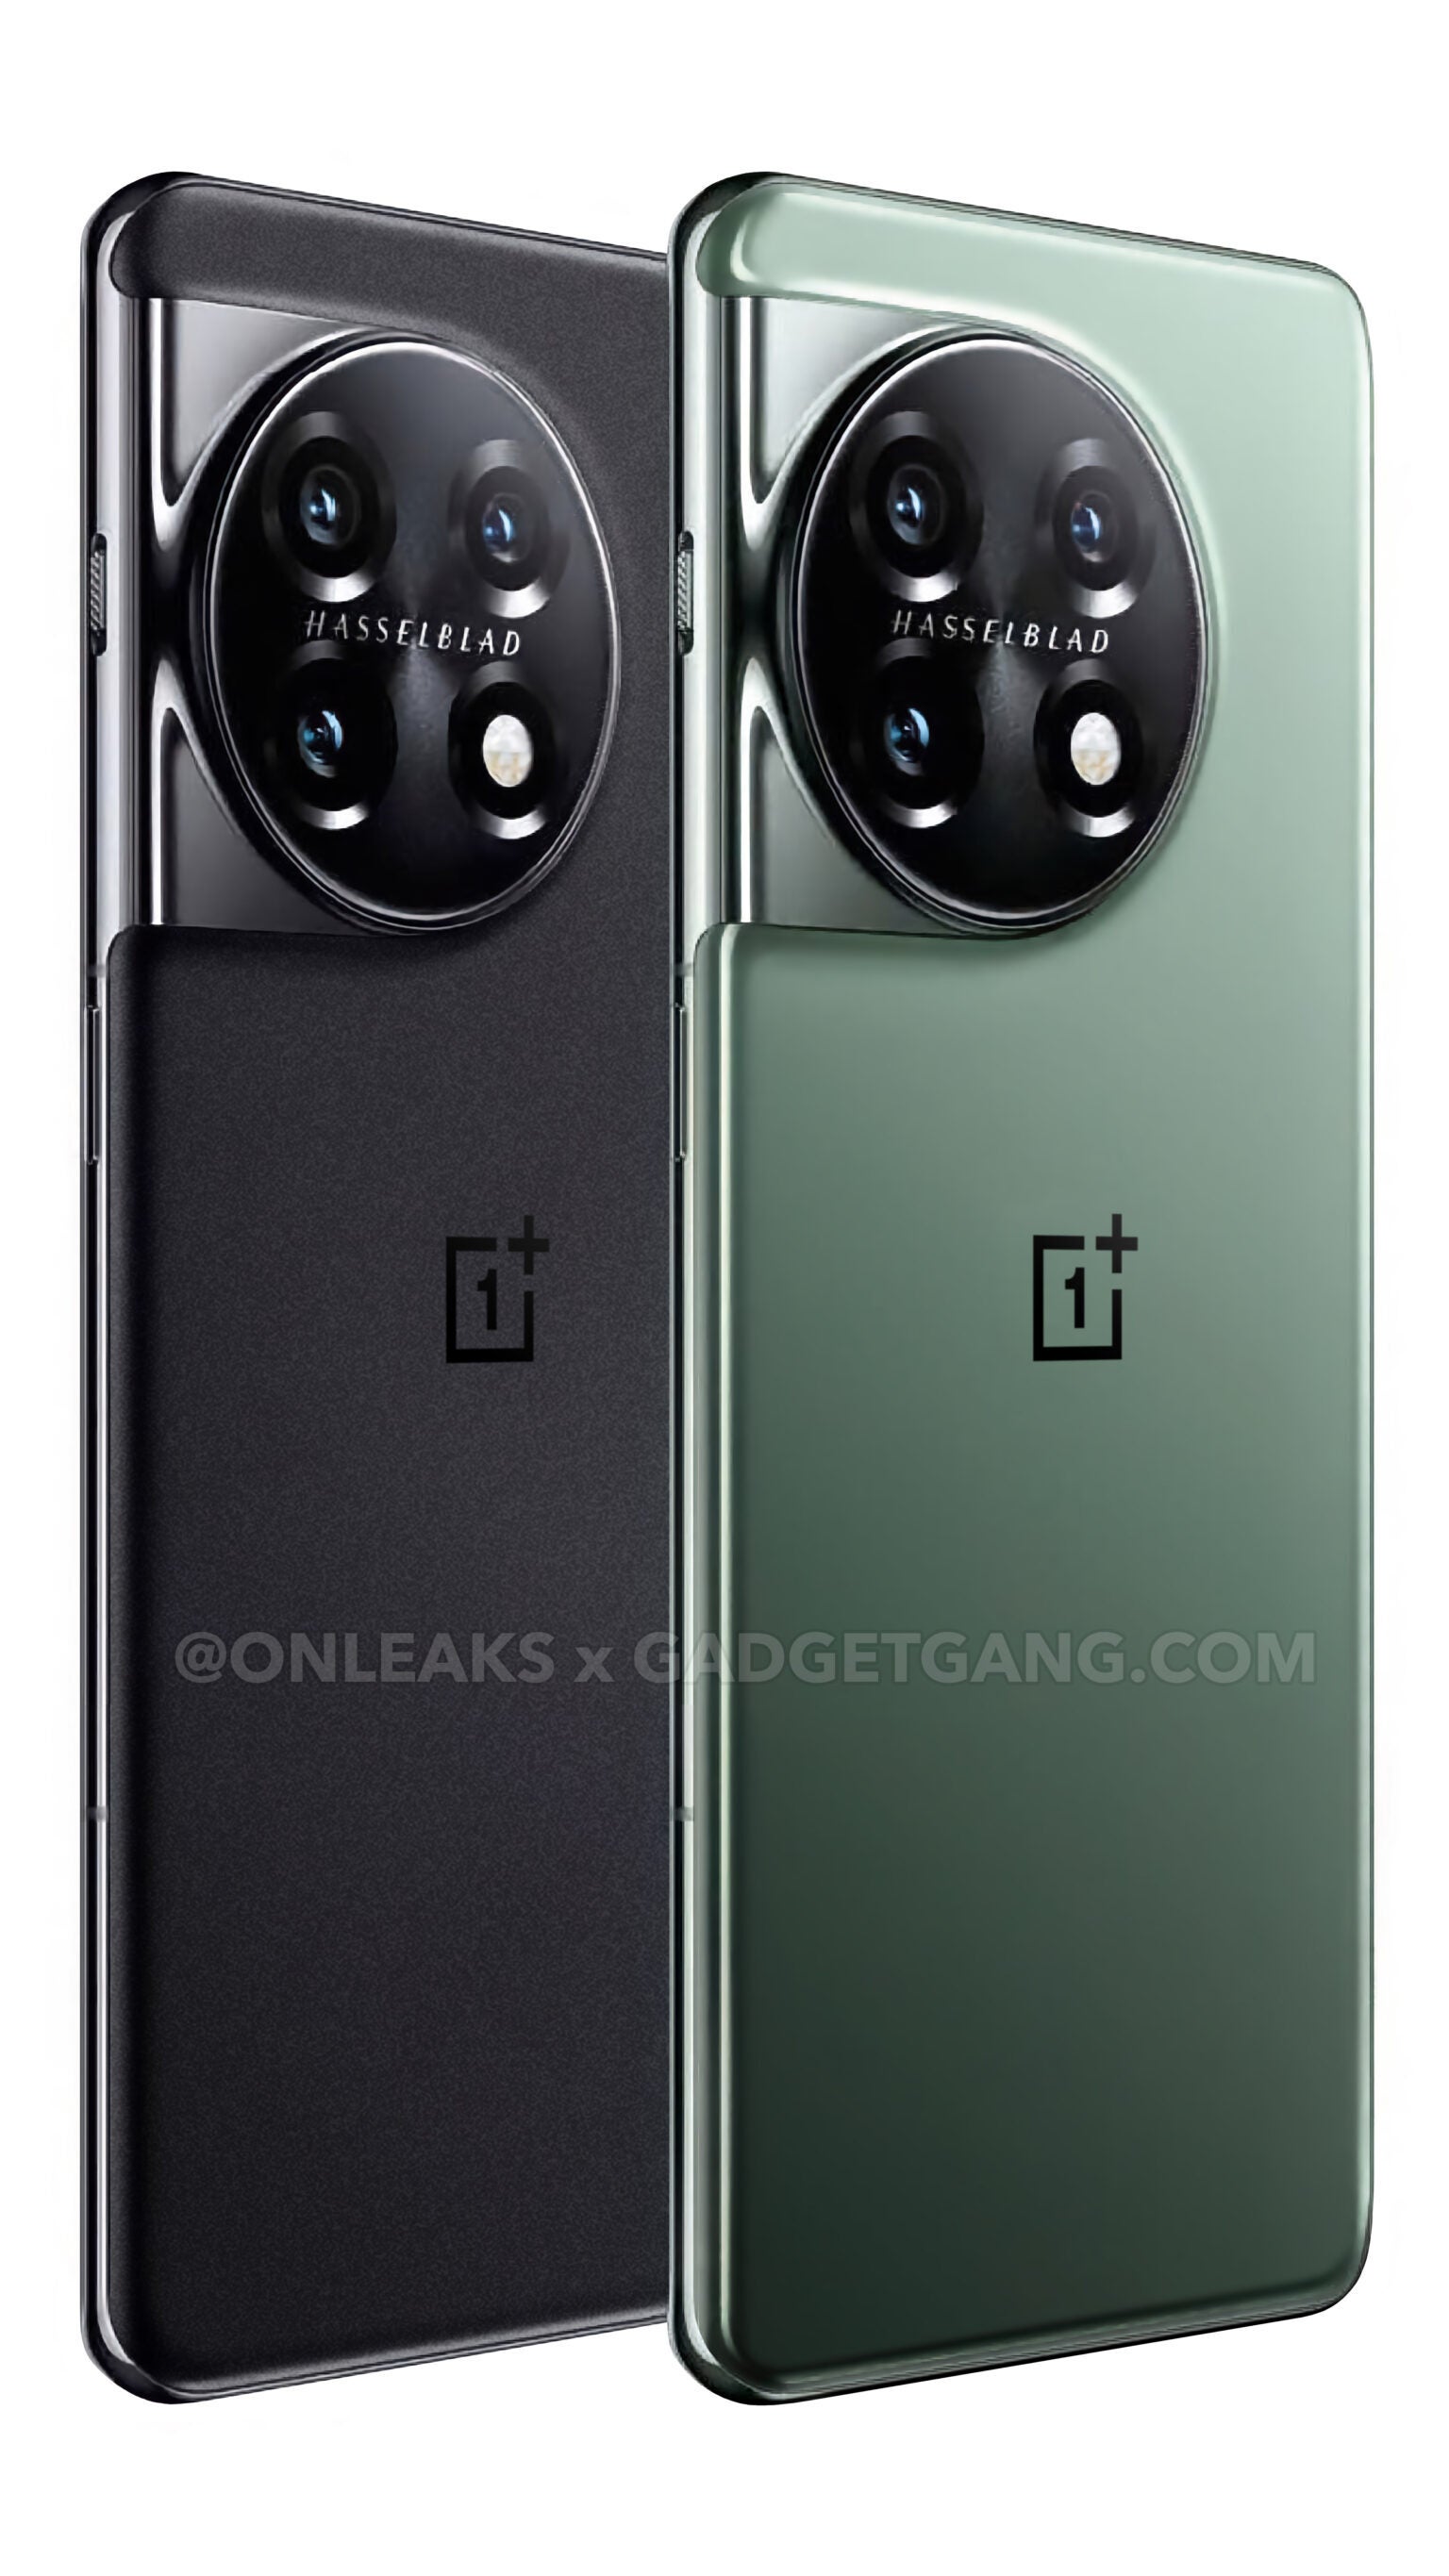 (Image Credit — OnLeaks and GadgetGang) Leaked photo of the OnePlus 11 in two color versions - Big OnePlus 11 leak shows alleged final design, reveals more secrets